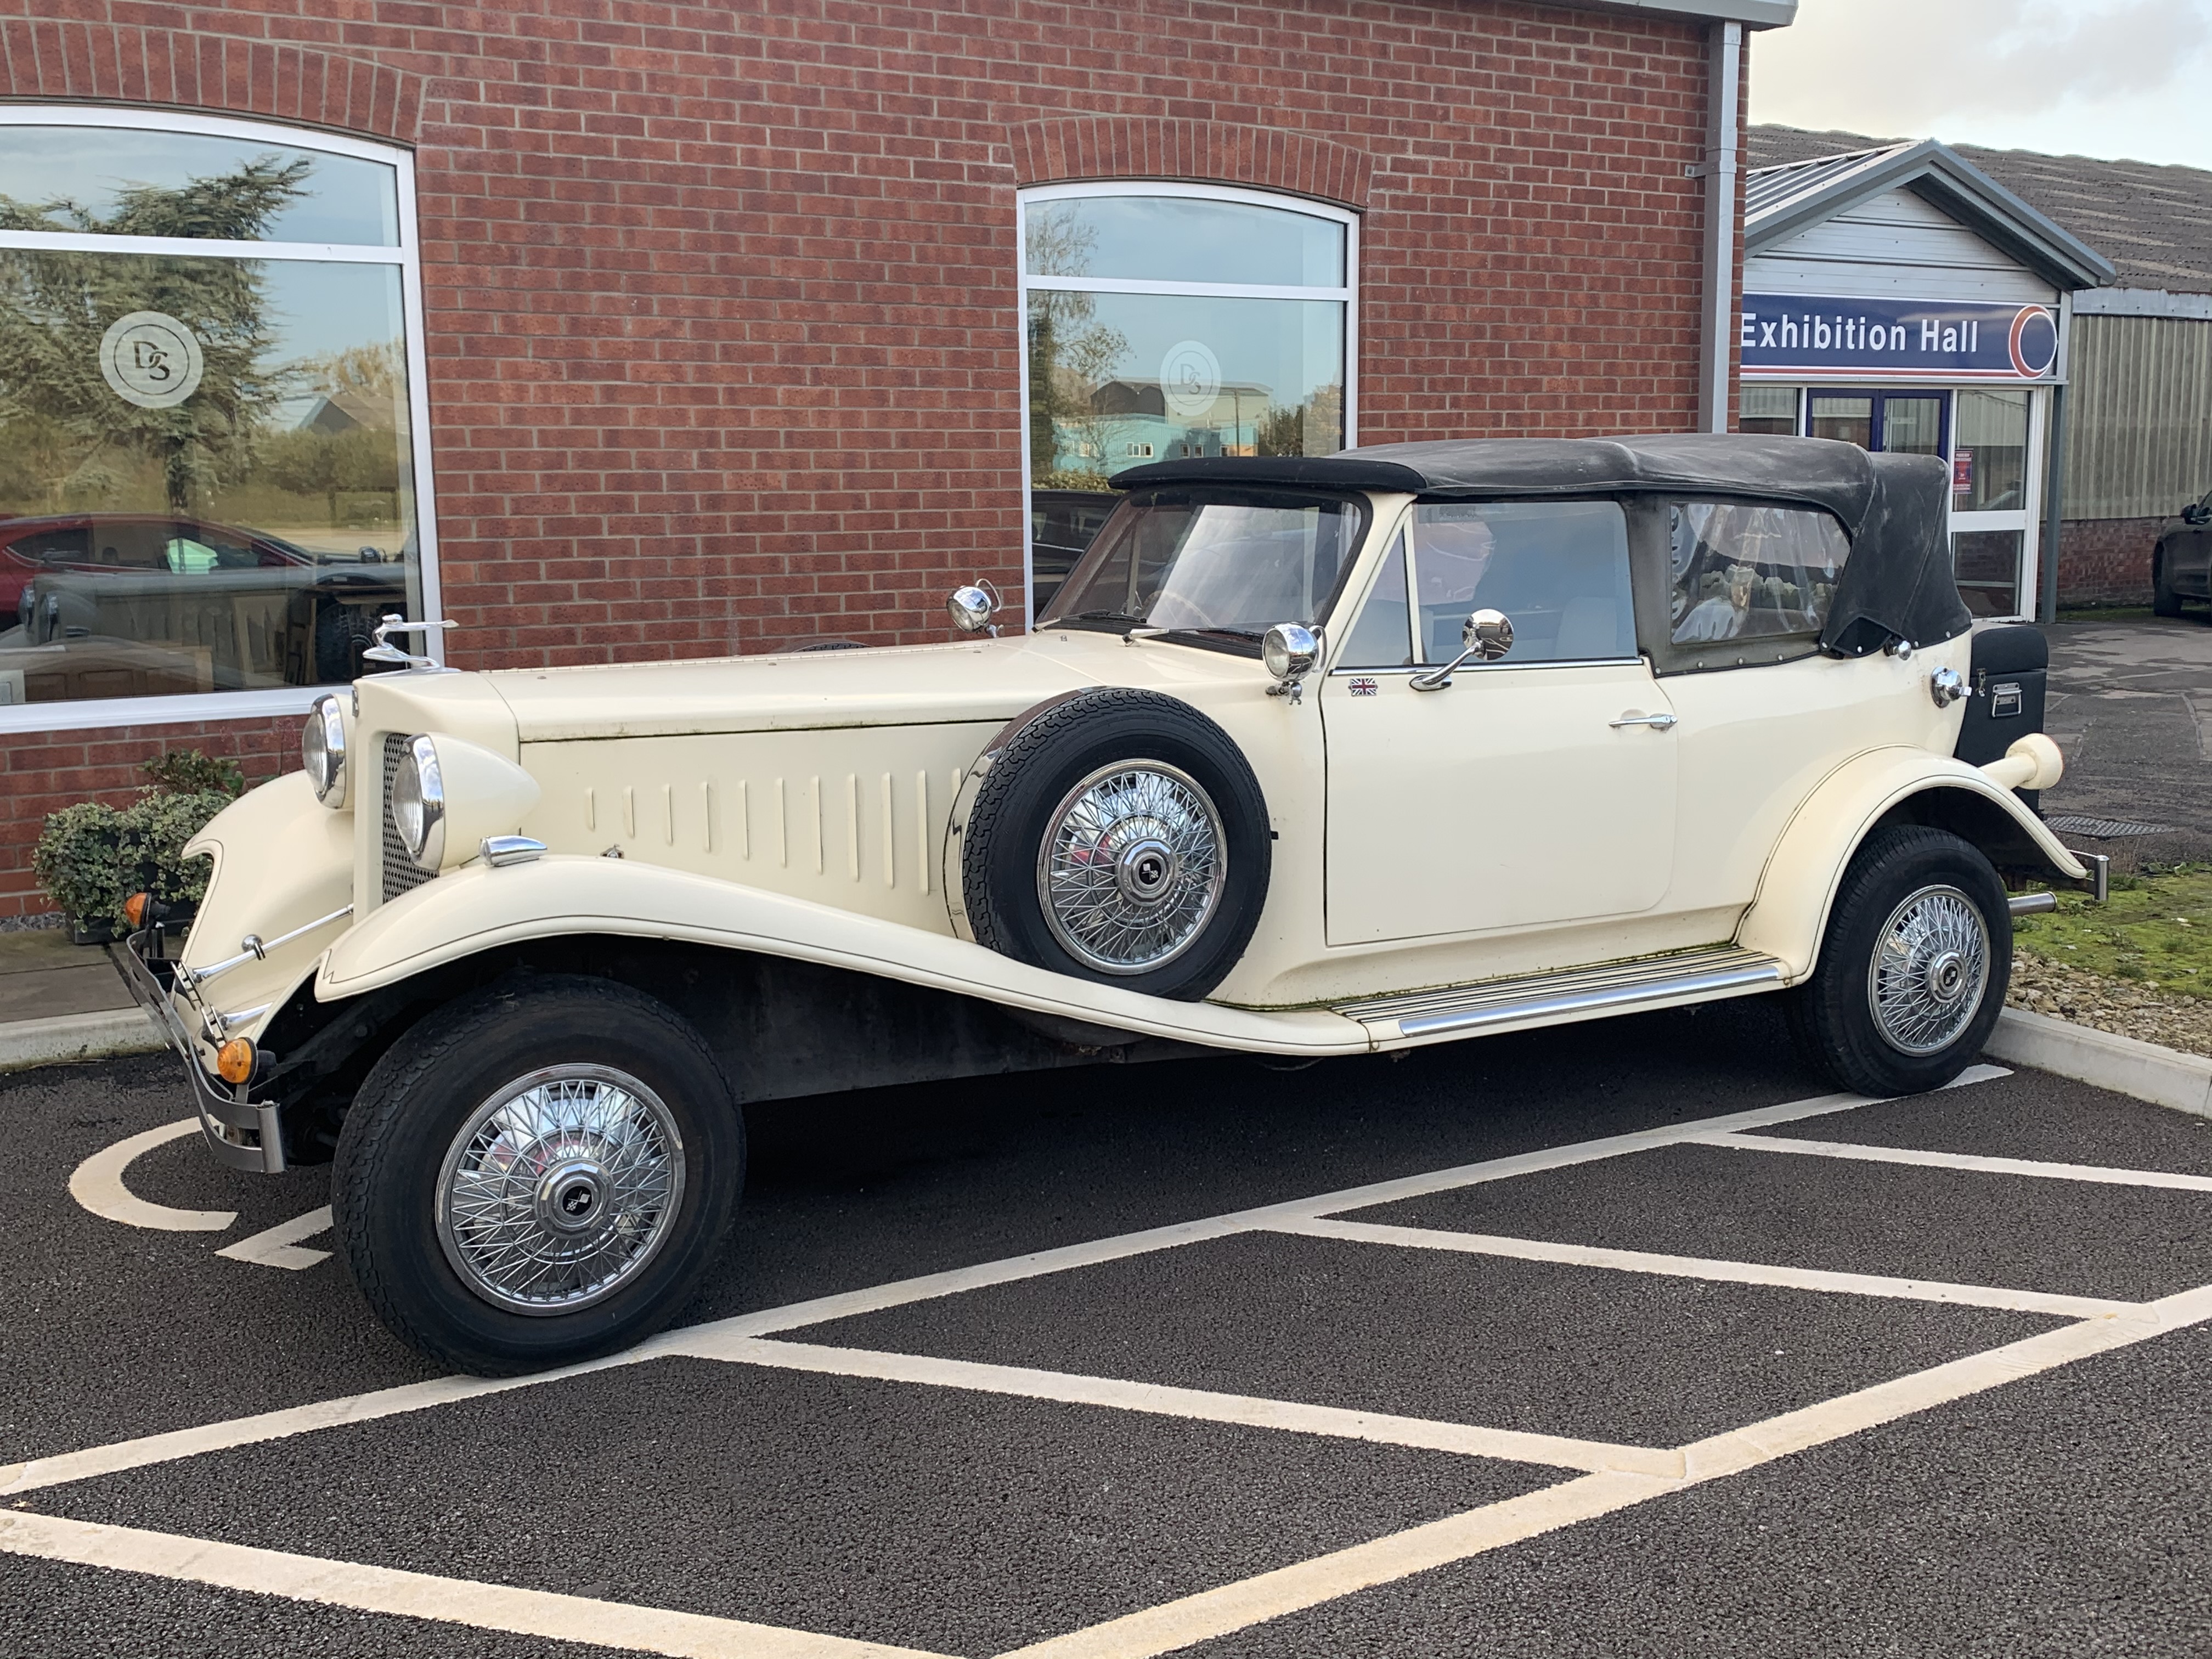 Beauford wedding car - 1980's replica of a classic 1930's two door grand tourer luxury car, with fou - Image 14 of 16